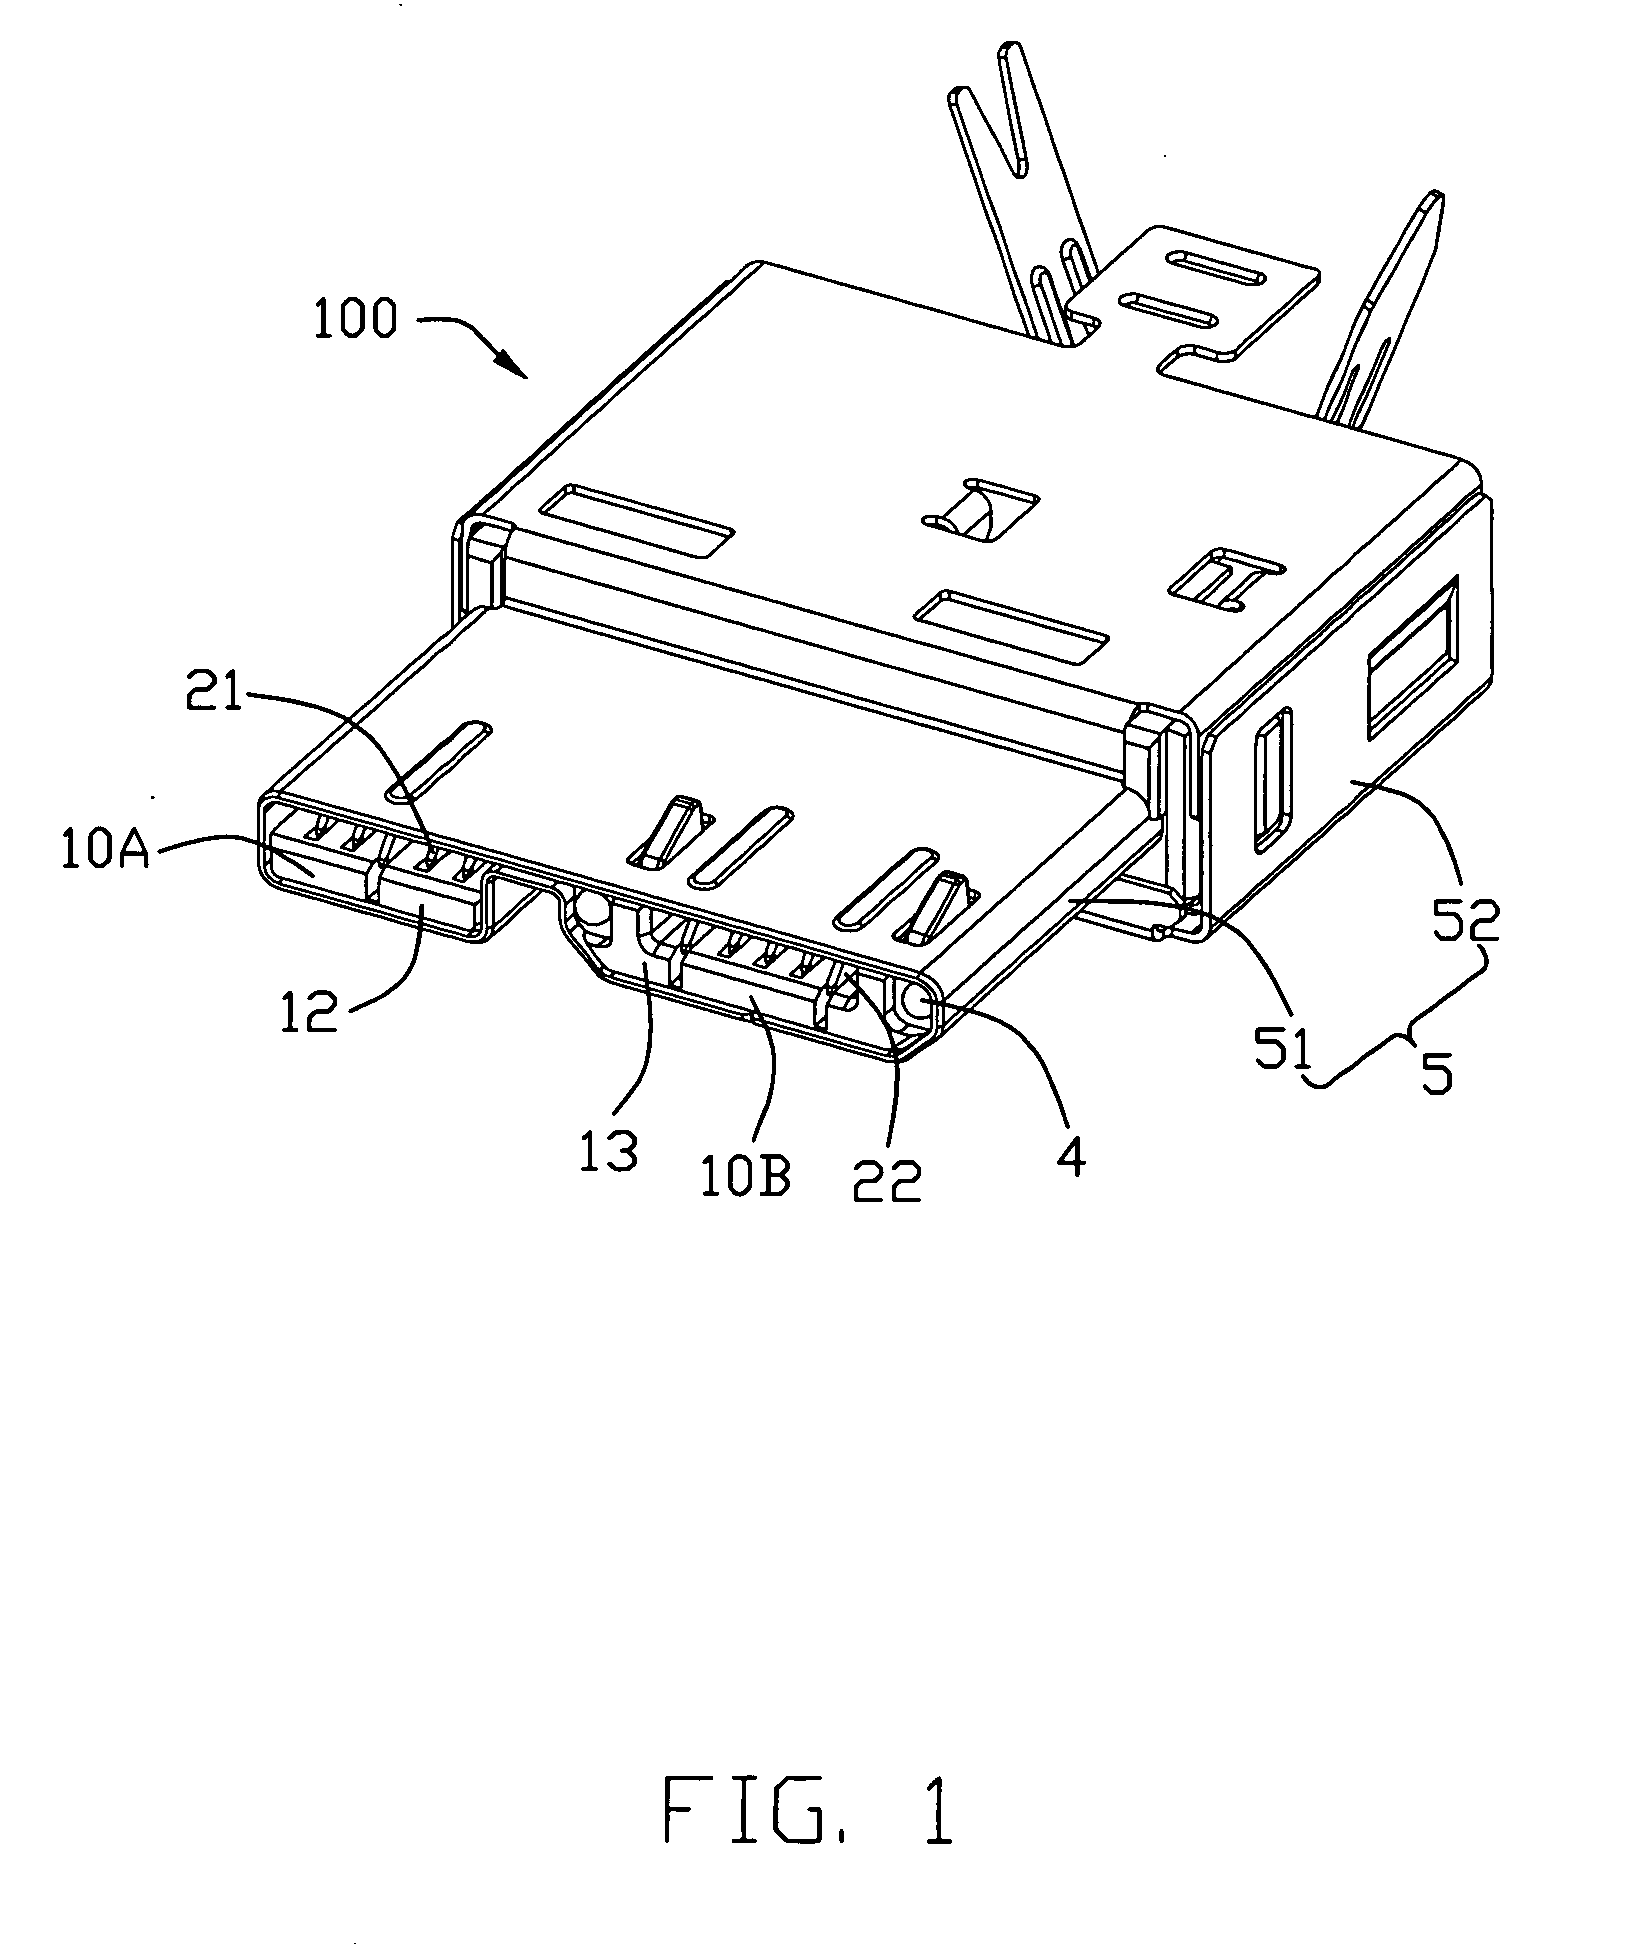 Connector utilized for different kinds of signal transmition